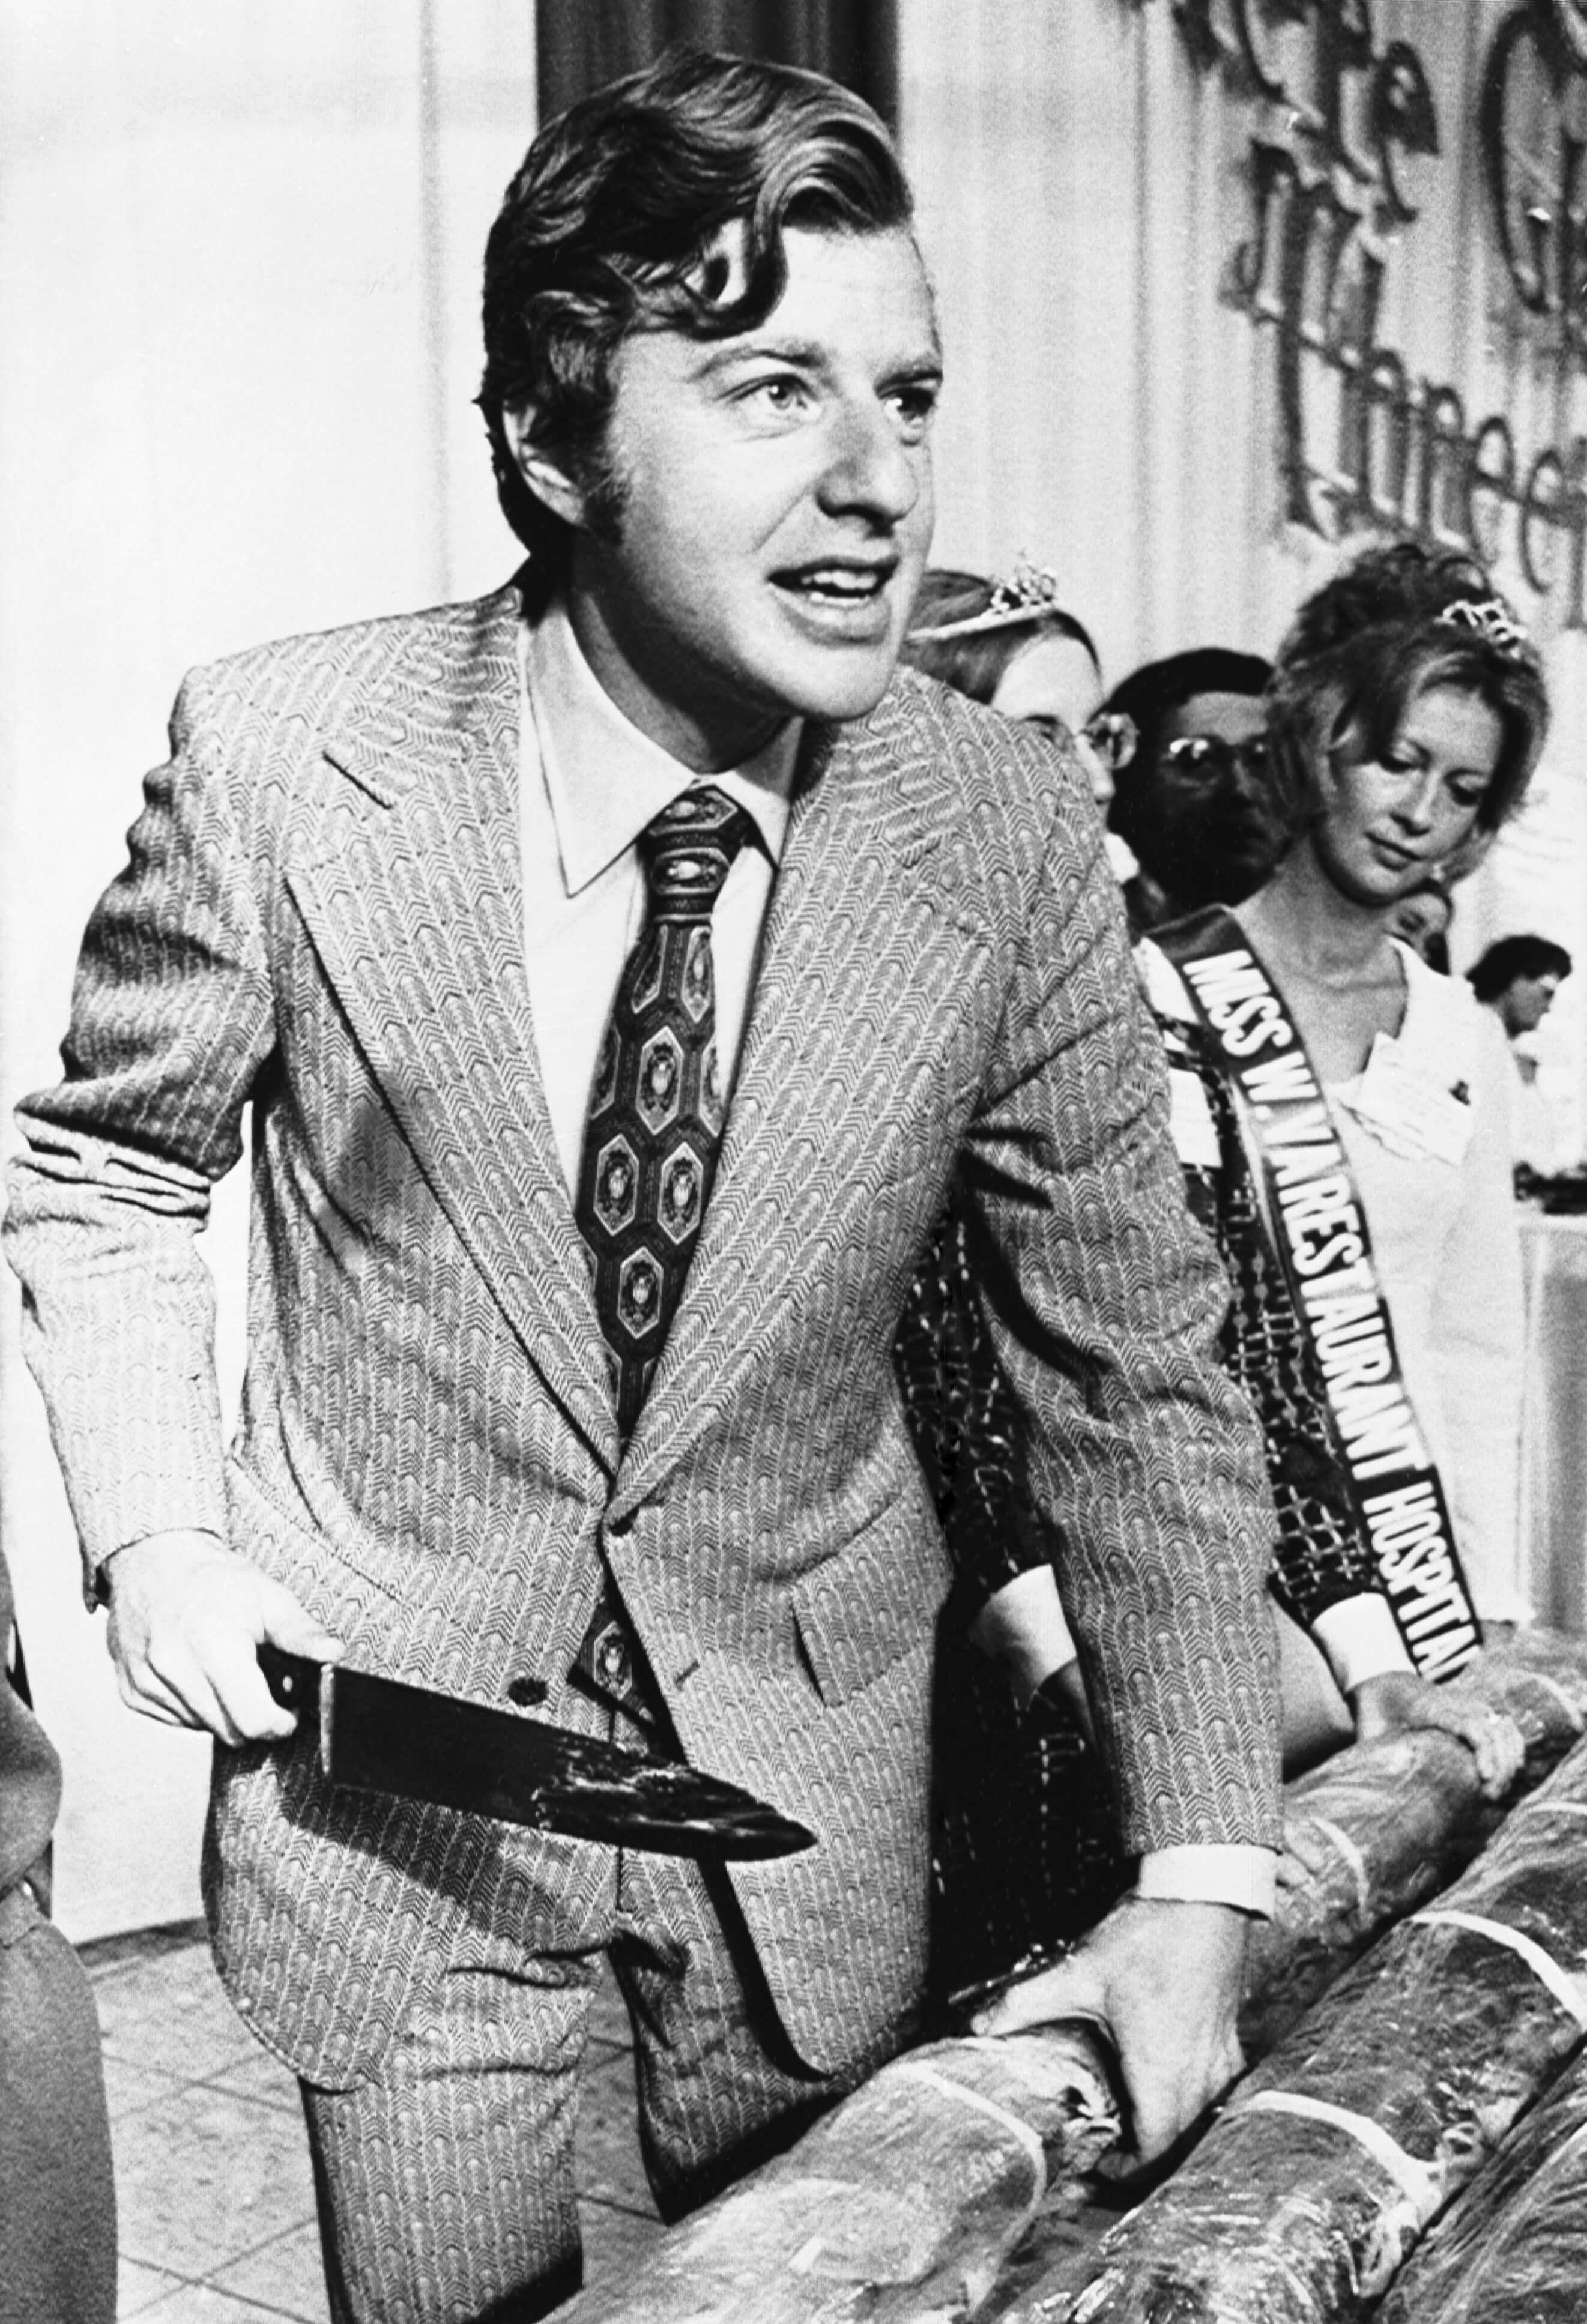 A black and white photo of Jerry Springer in 1974. Jerry Springer as involved in a scandal that may have threatened his relationship with his wife.